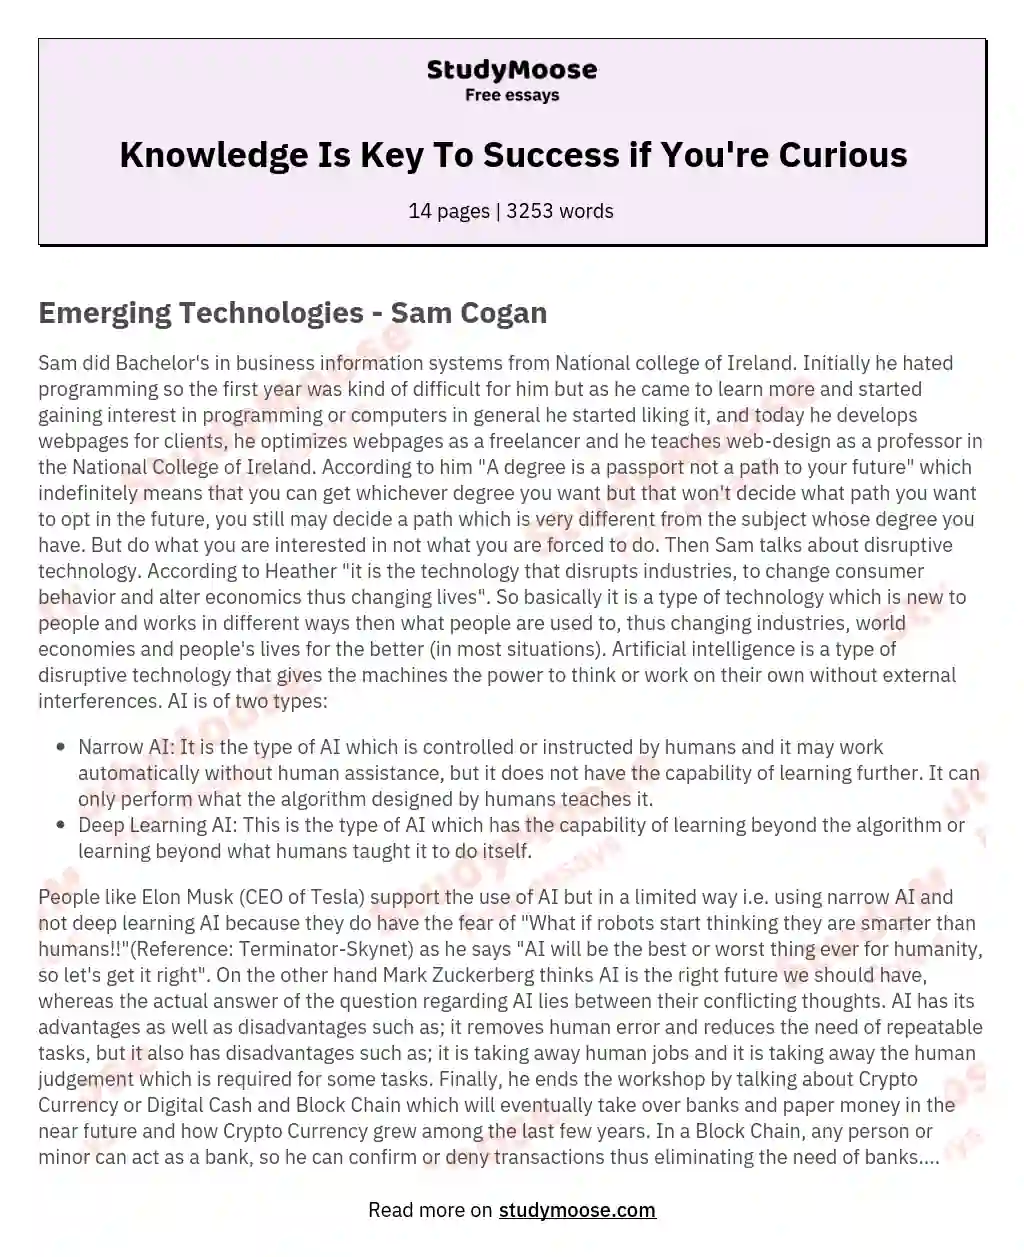 Knowledge Is Key To Success if You're Curious essay